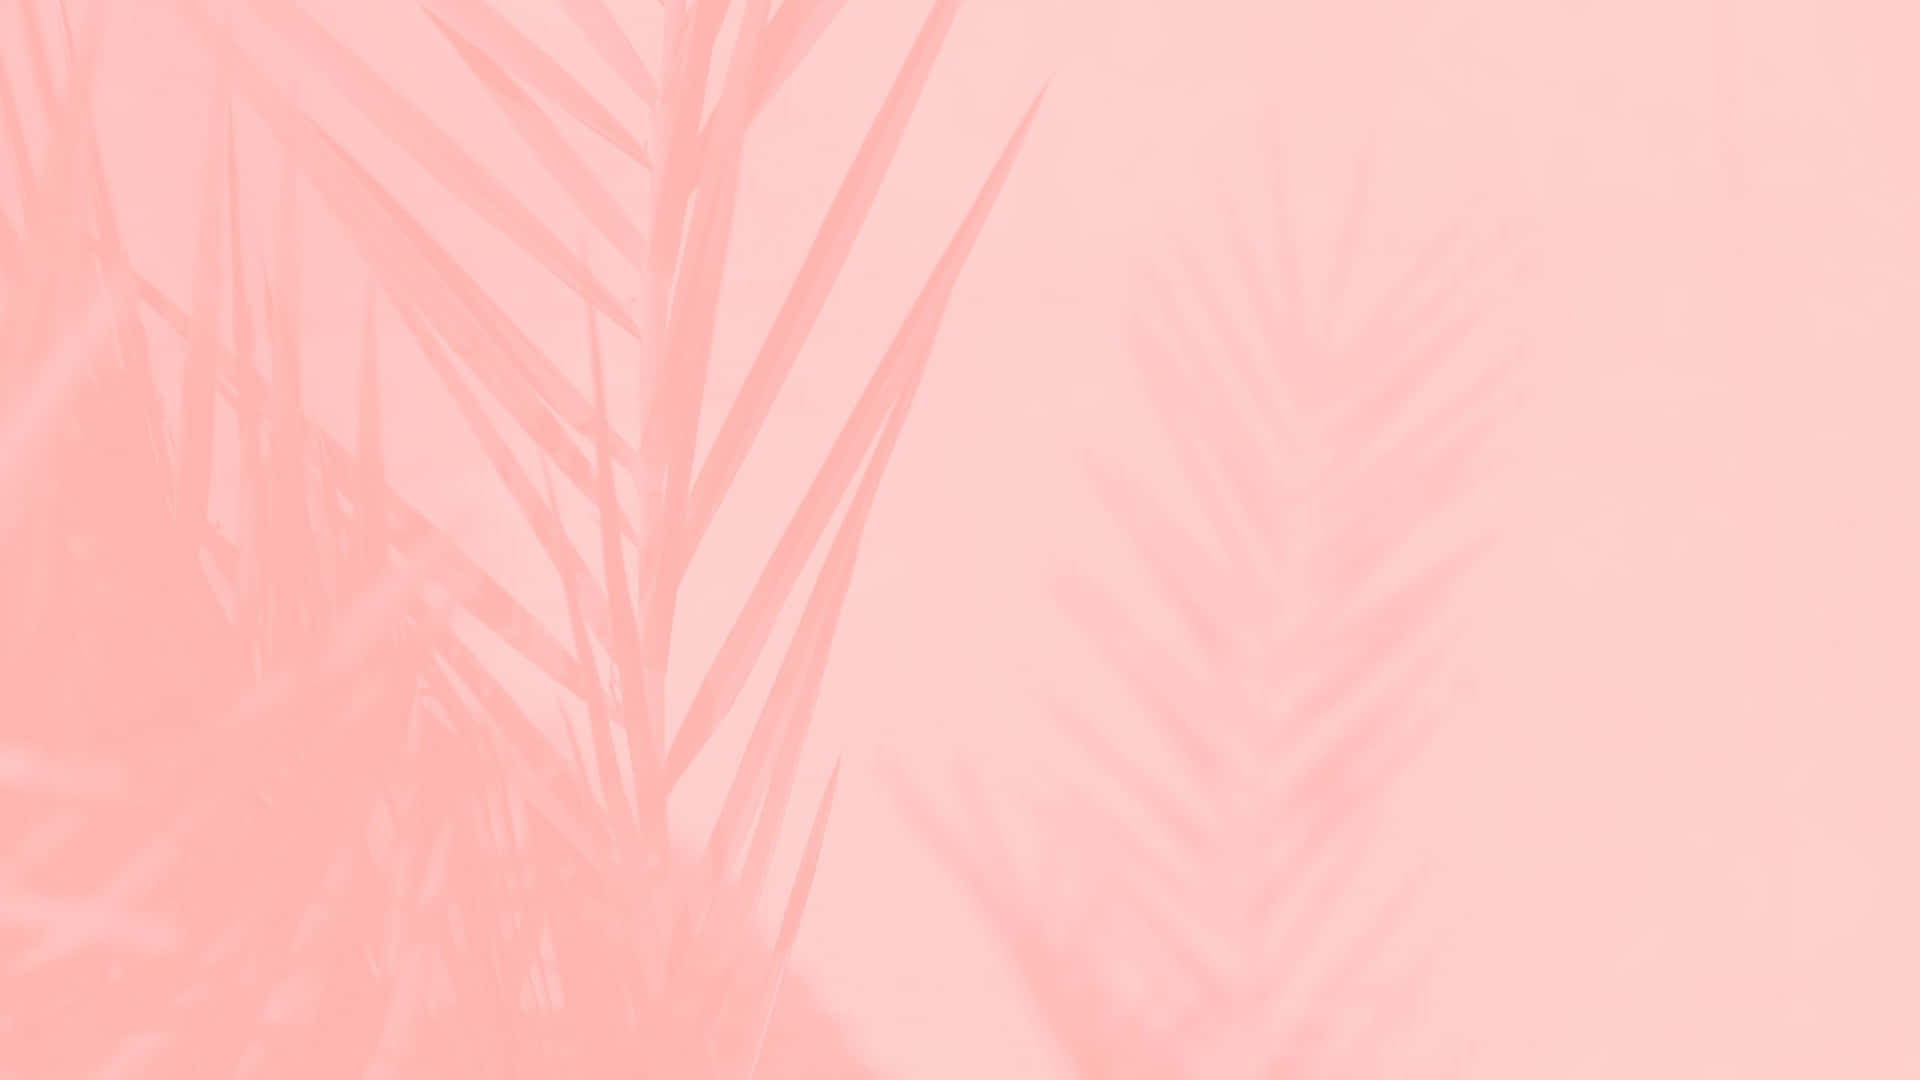 Aesthetic Computer Light Pink Leaves Silhouette Wallpaper